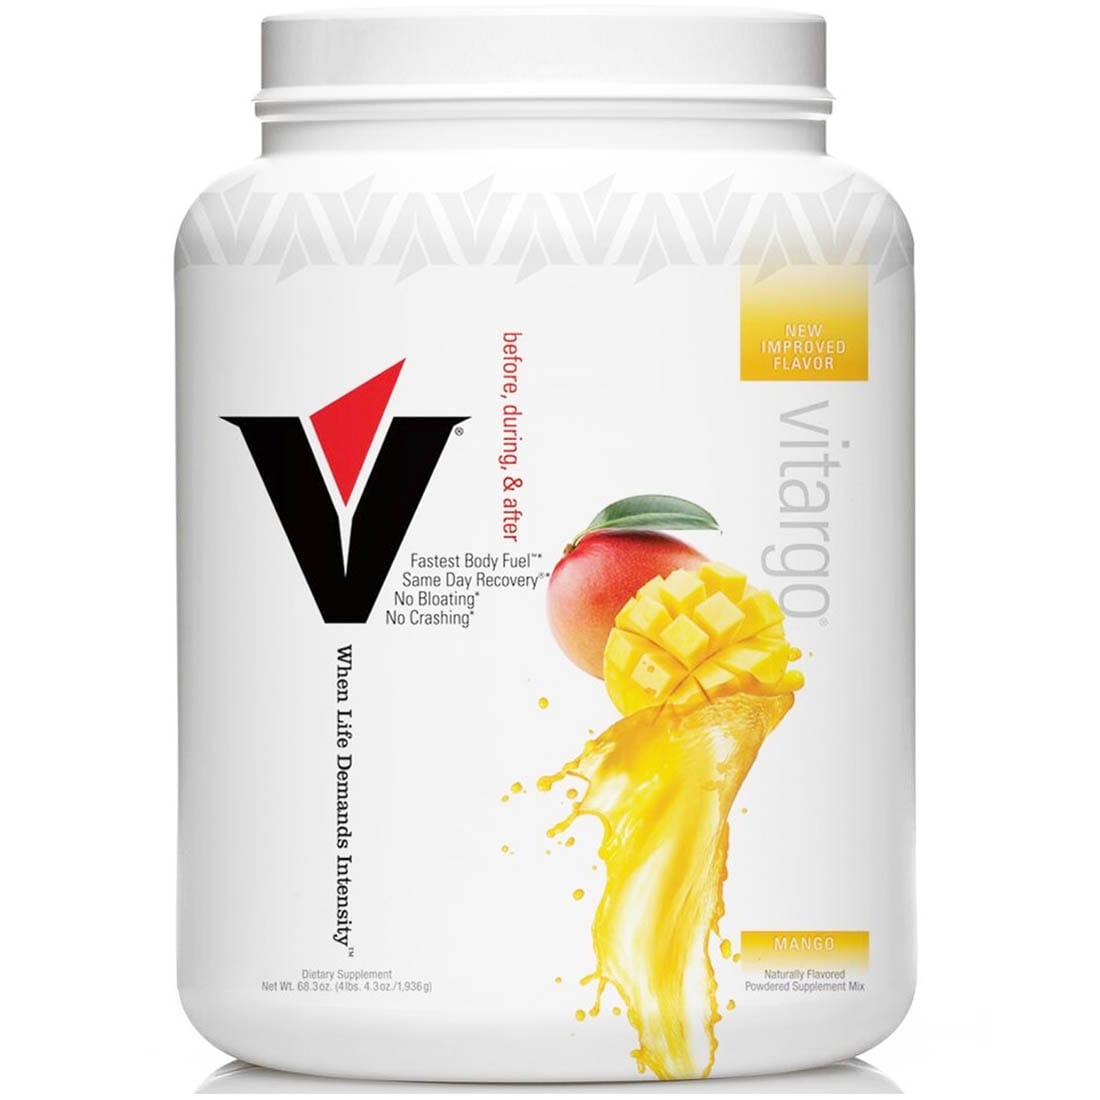 Vitargo Electrolyte Carbohydrate Supplement